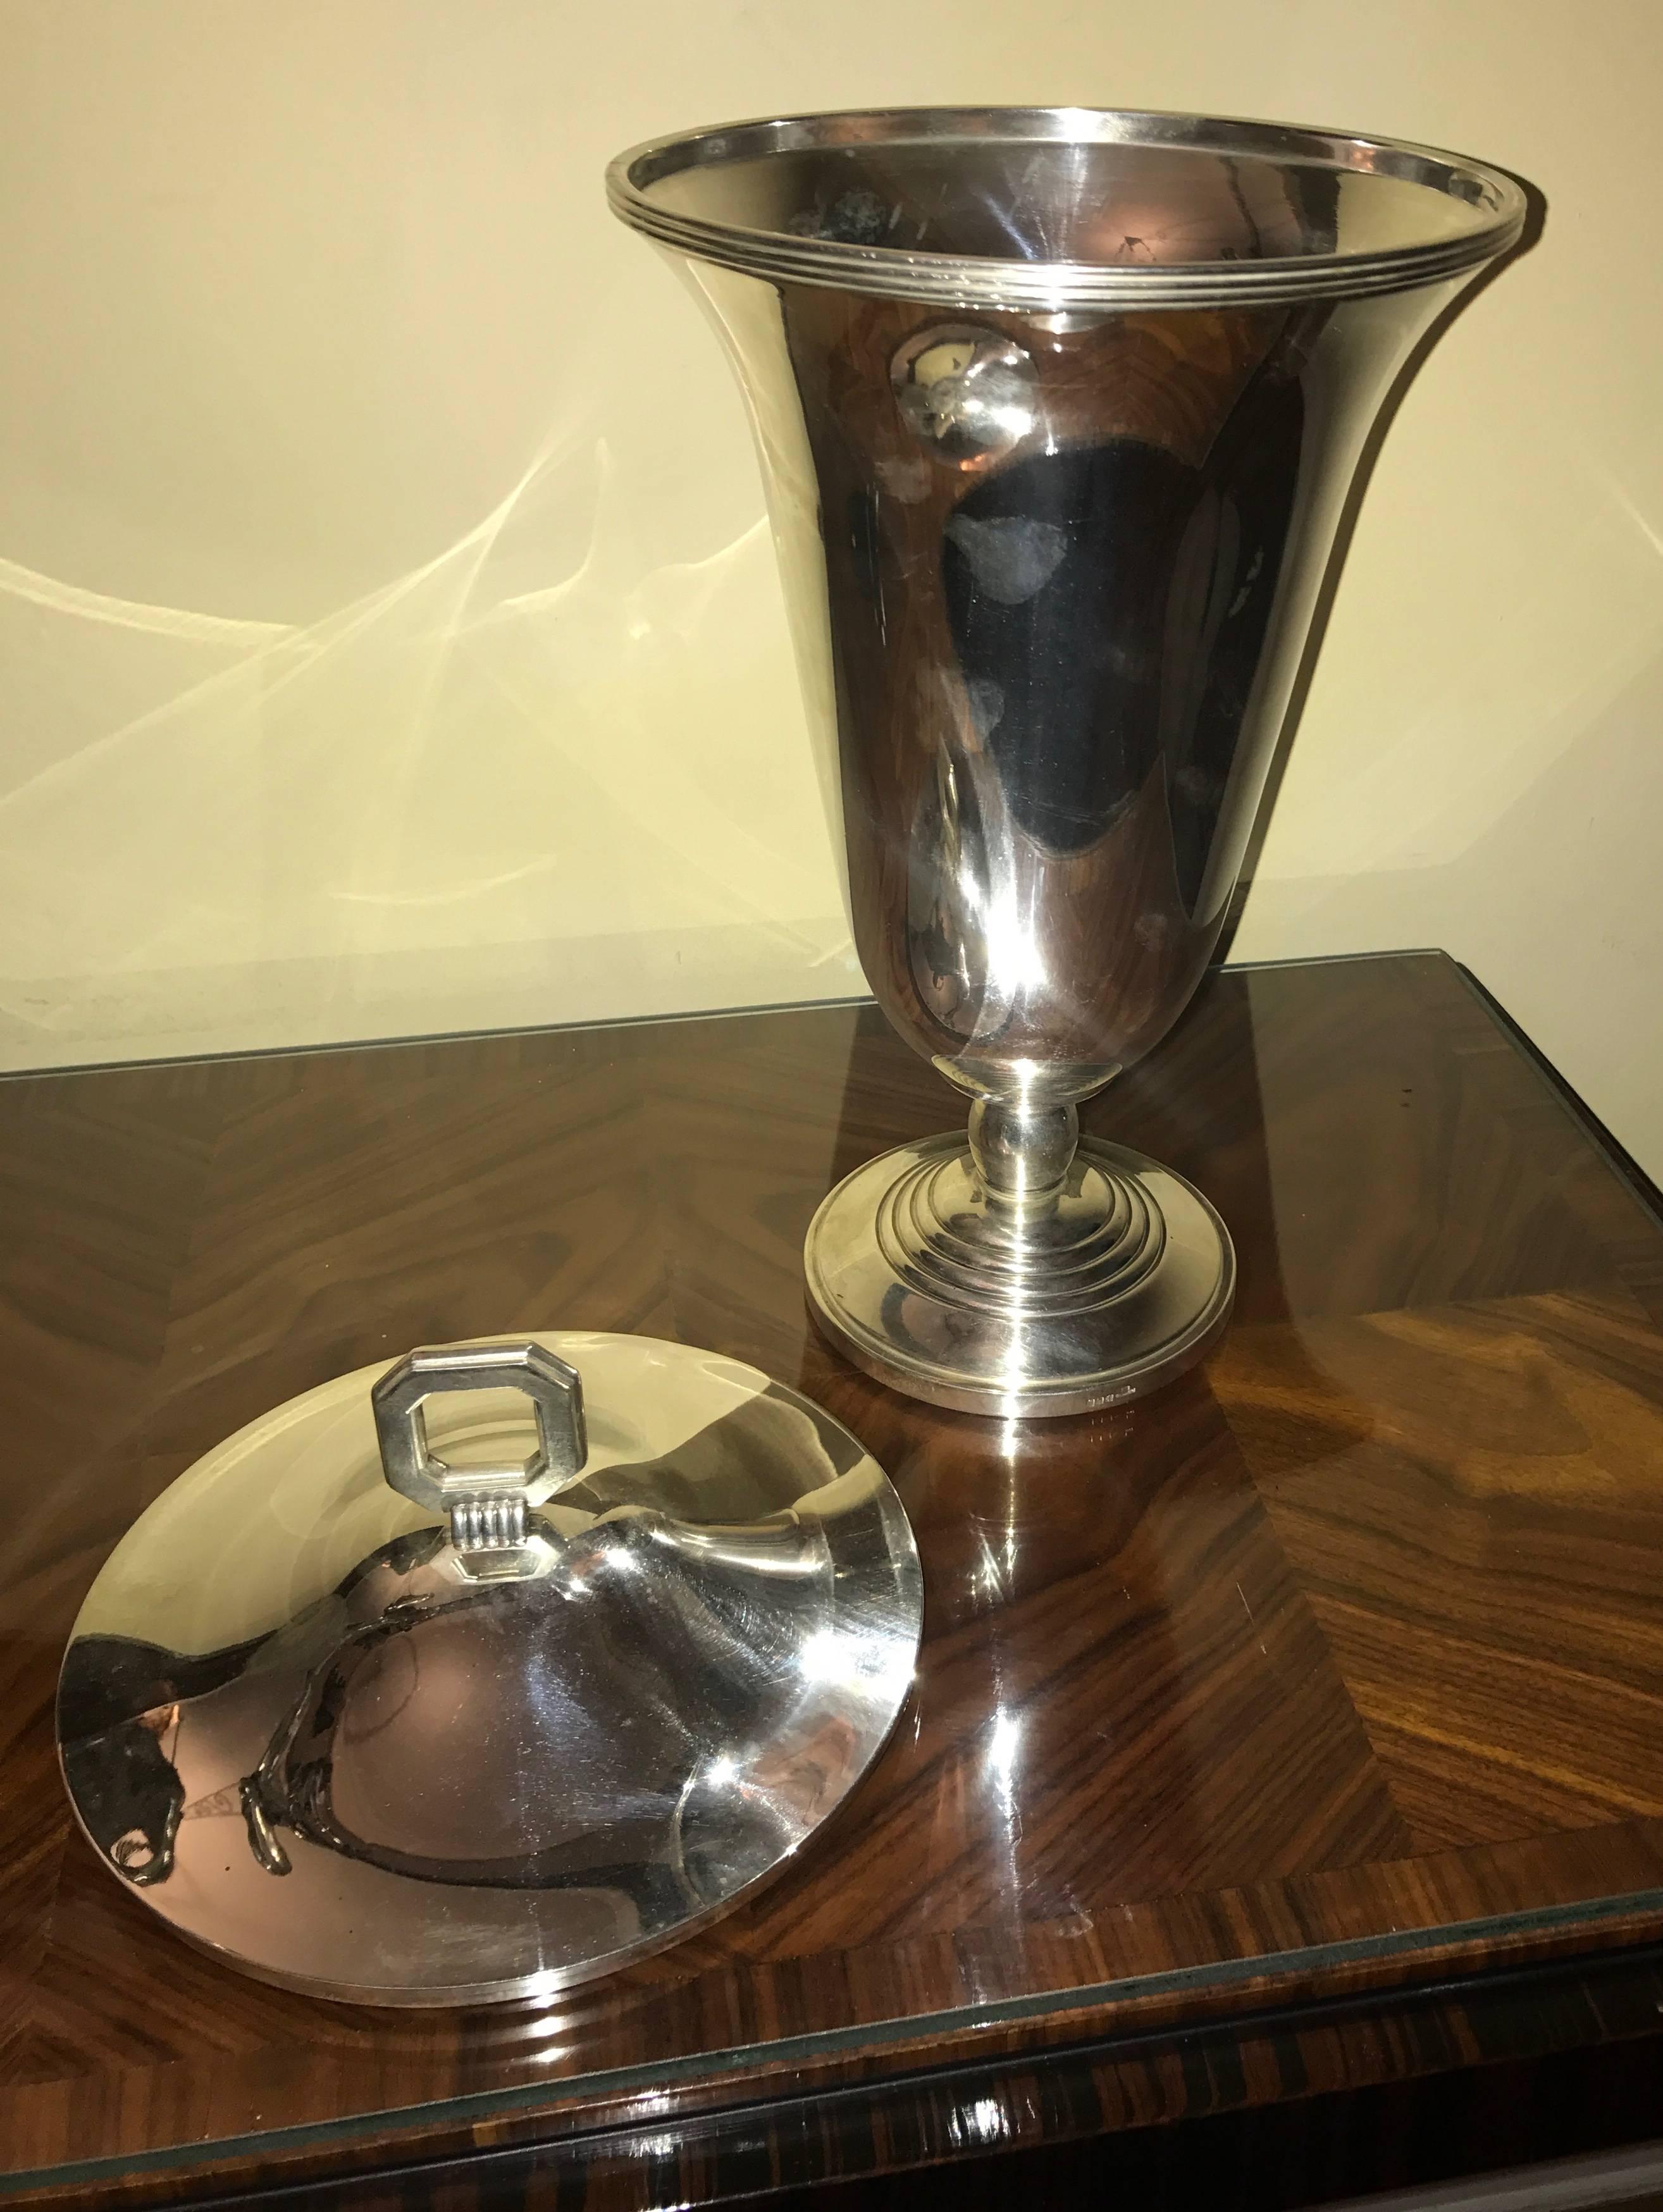 Christofle Luc Lanel Normandie Art Deco Vase. This is an extremely rare silver plate urn designed for the first class quarters/cabins of the French transatlantic ocean liner Normandie. A very unusual item, completely restored and in perfect